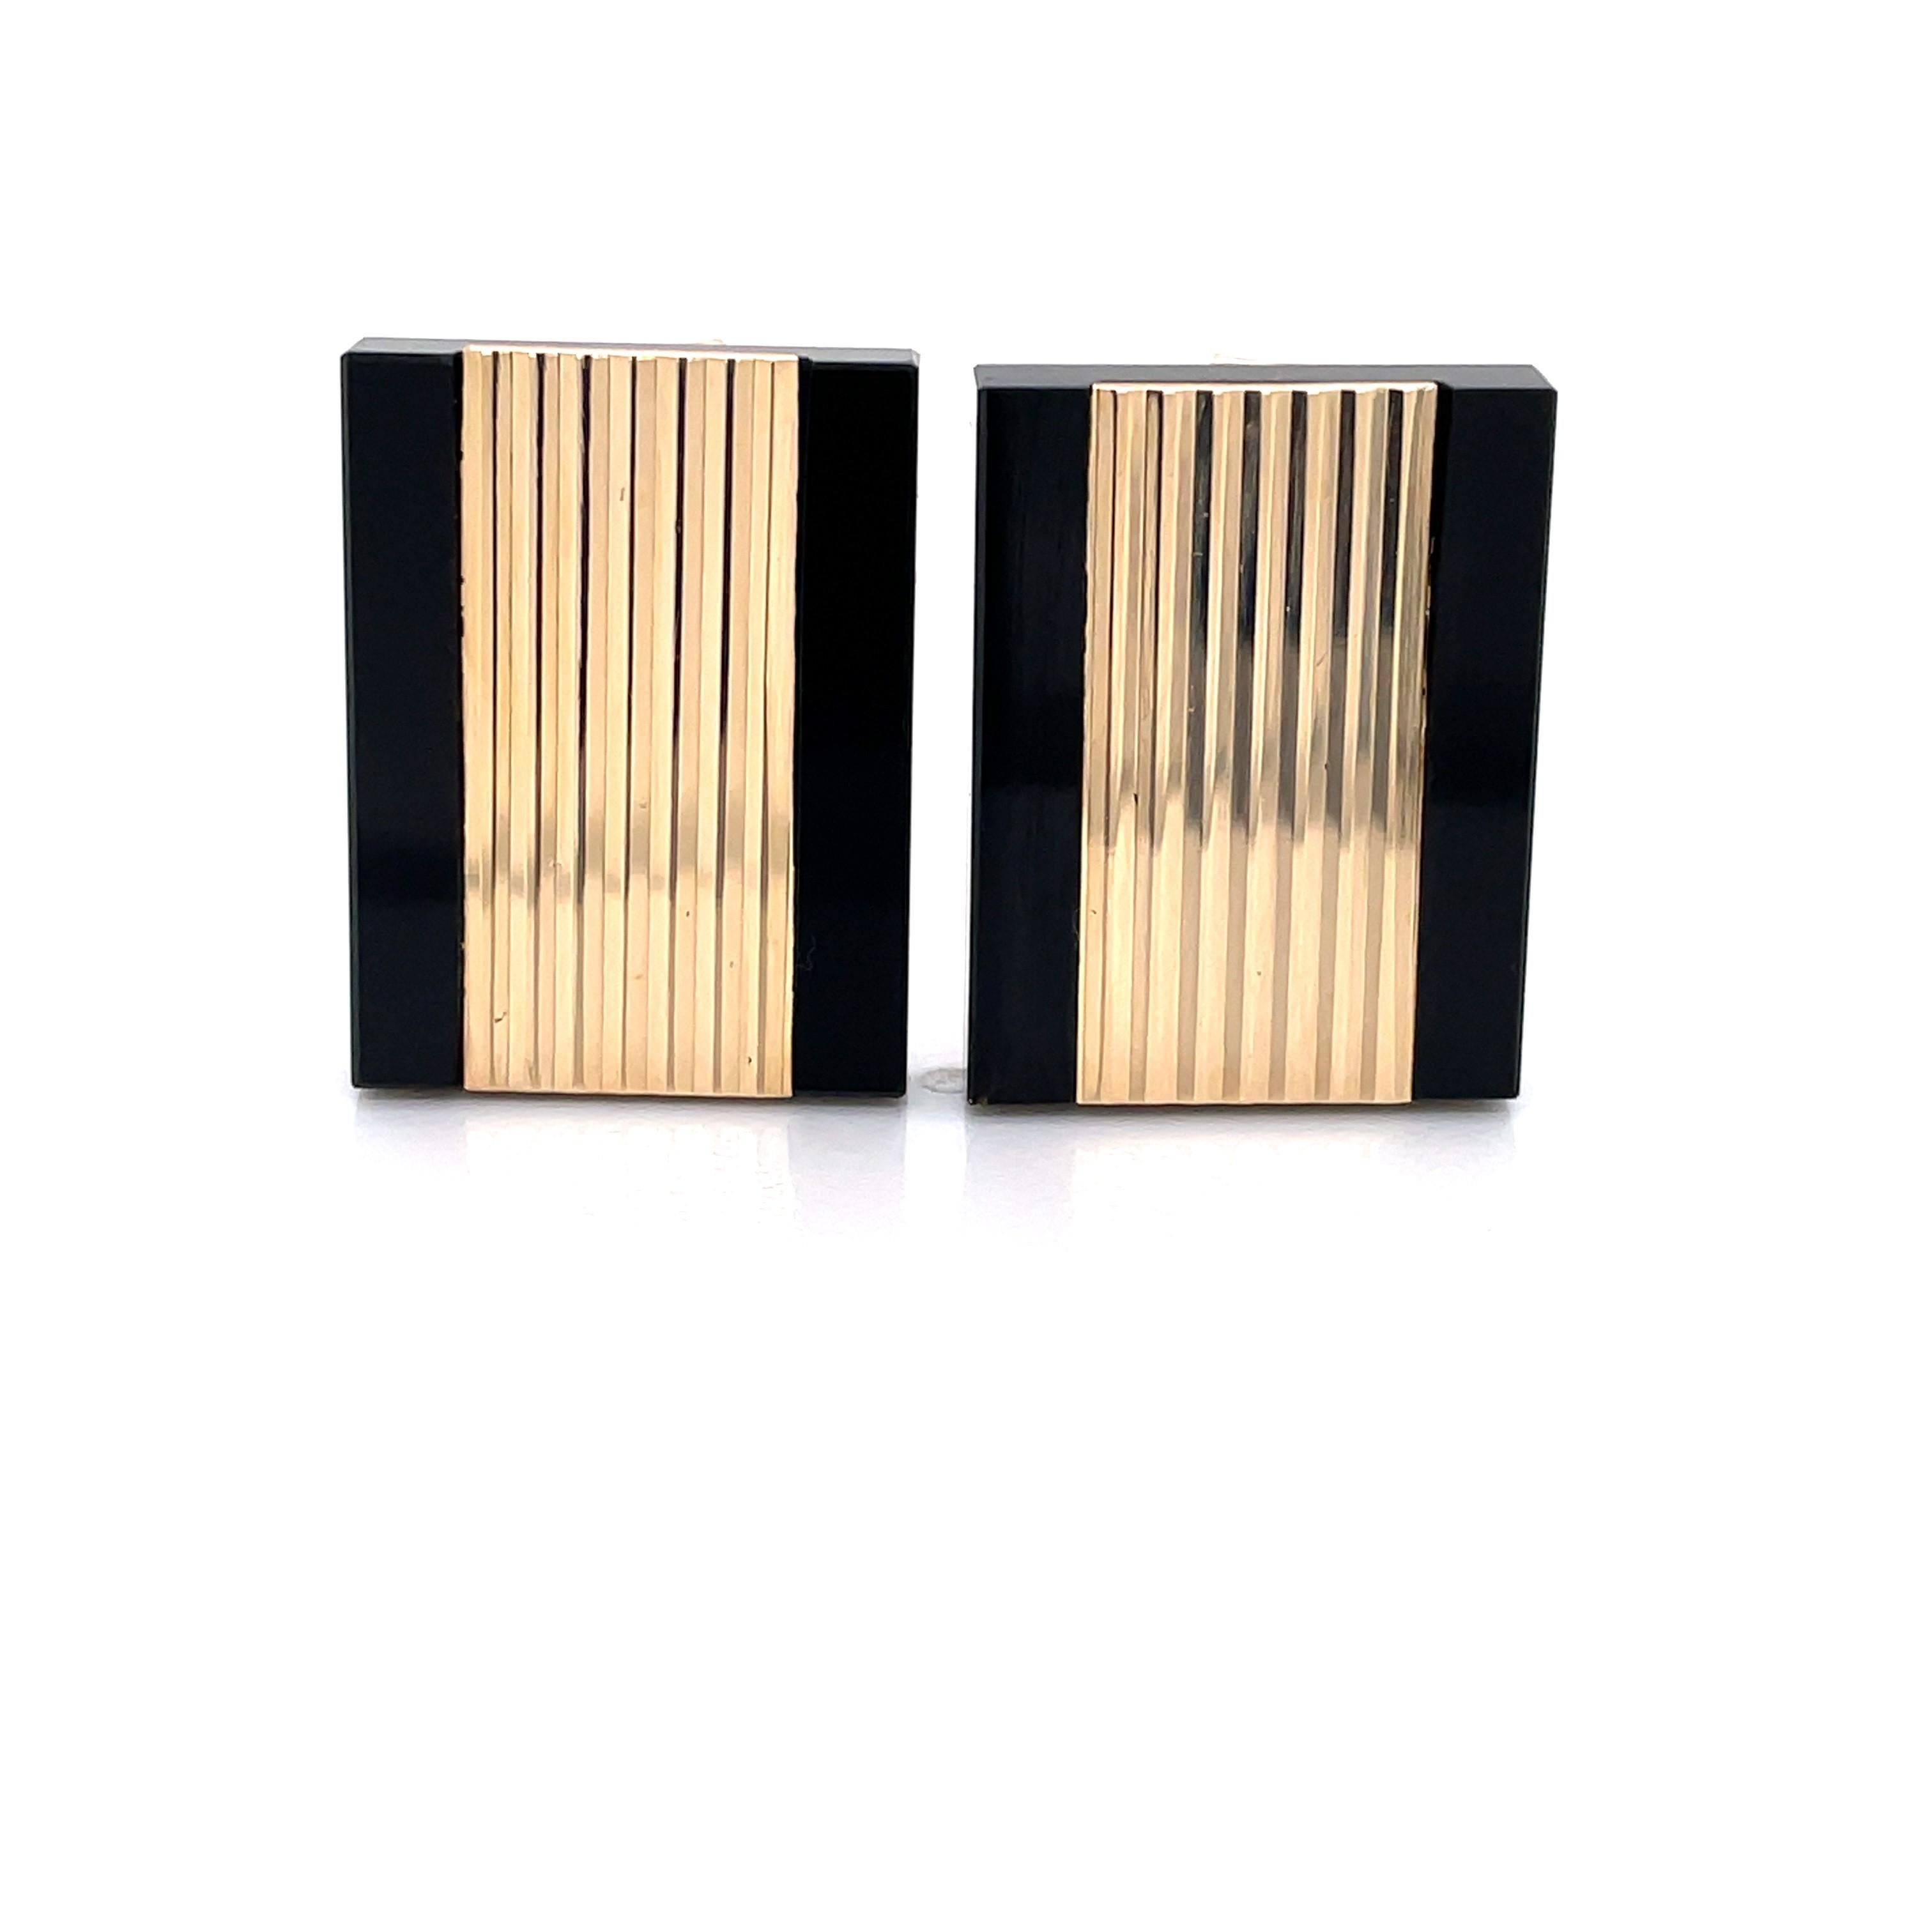 The power combination of gold and black make the right impression for any special occasion. Add this fine detail to your wedding attire or next formal function.
Rectangular in shape, measuring 1 x 3/4 inch, the pair is made of fourteen karat 14k